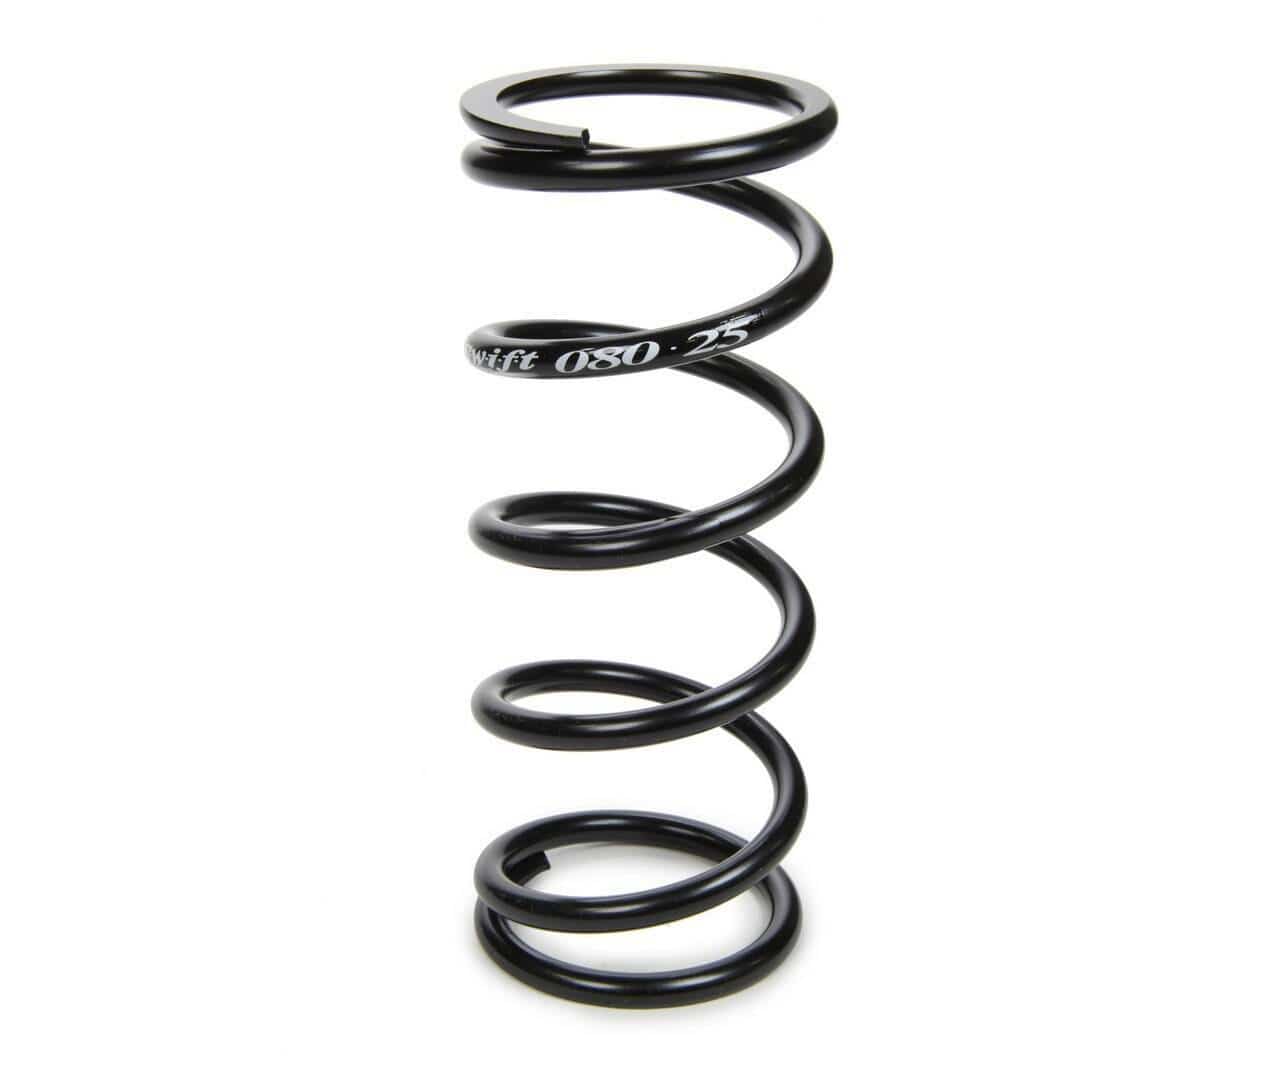 Swift Springs Standard Coilover Spring (Barrel Type) - ID 2.5", 6" Length